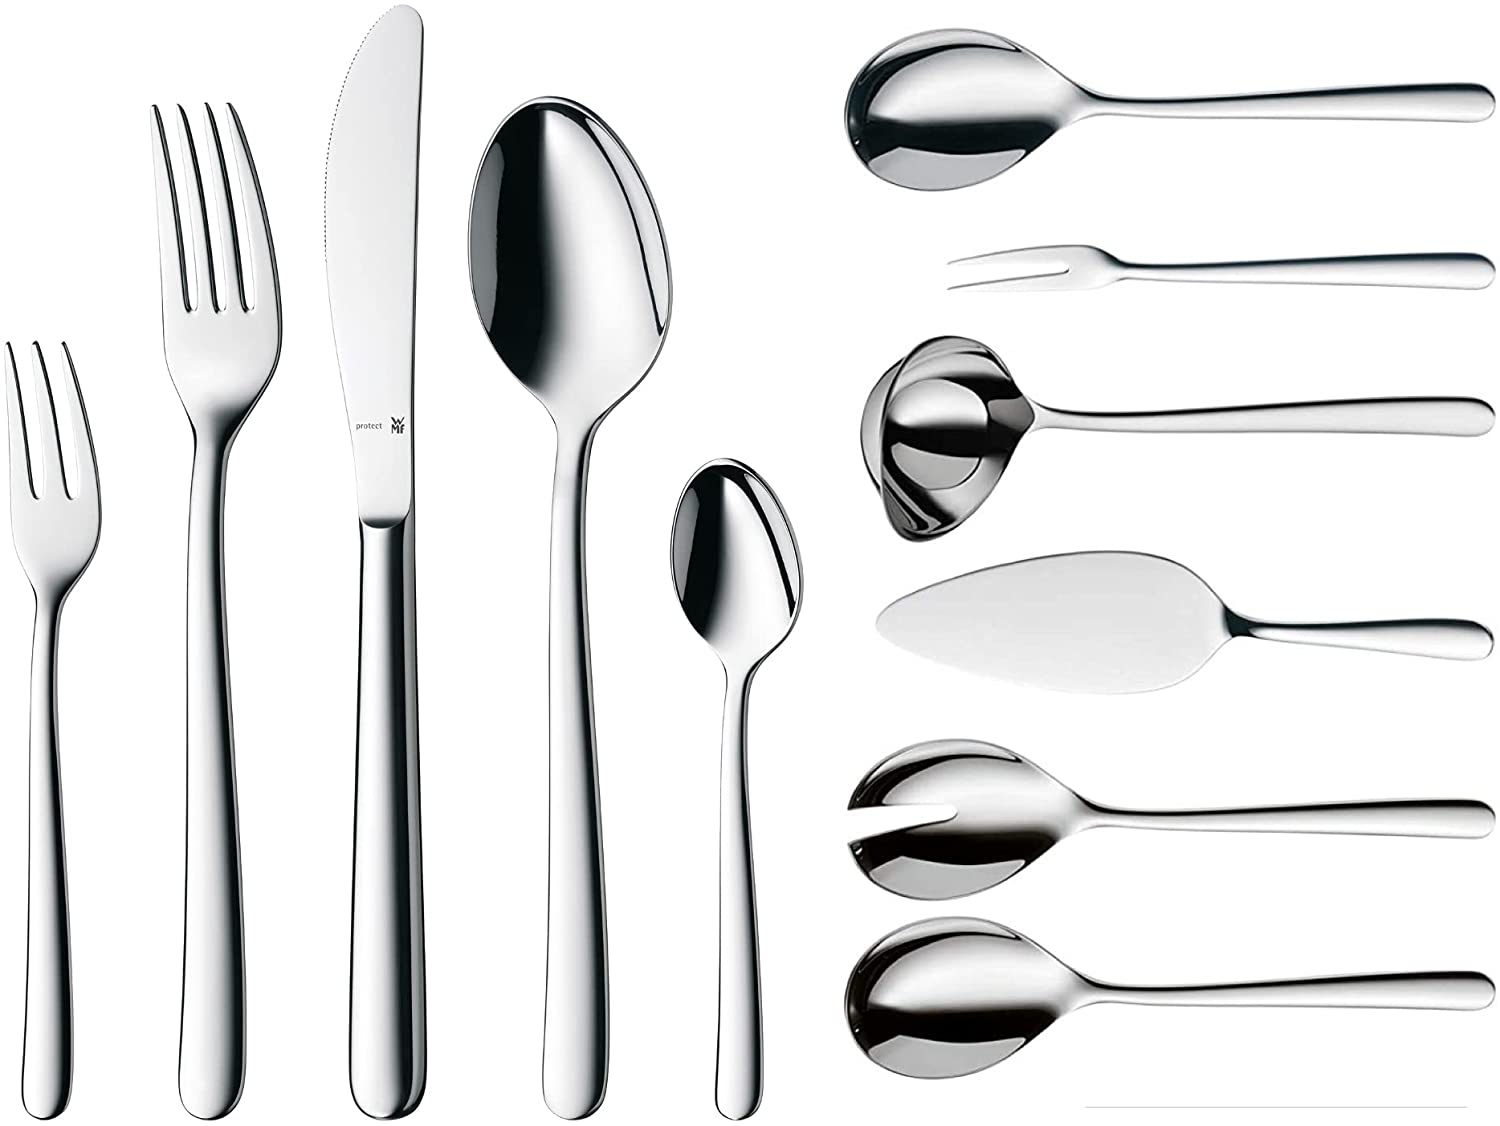 WMF Kult Cutlery Set for 12 People, 66 Pieces, 60 Pieces with Serving Cutlery, Monobloc Knife, Cromargan Protect Polished, Scratch-Resistant, Dishwasher Safe